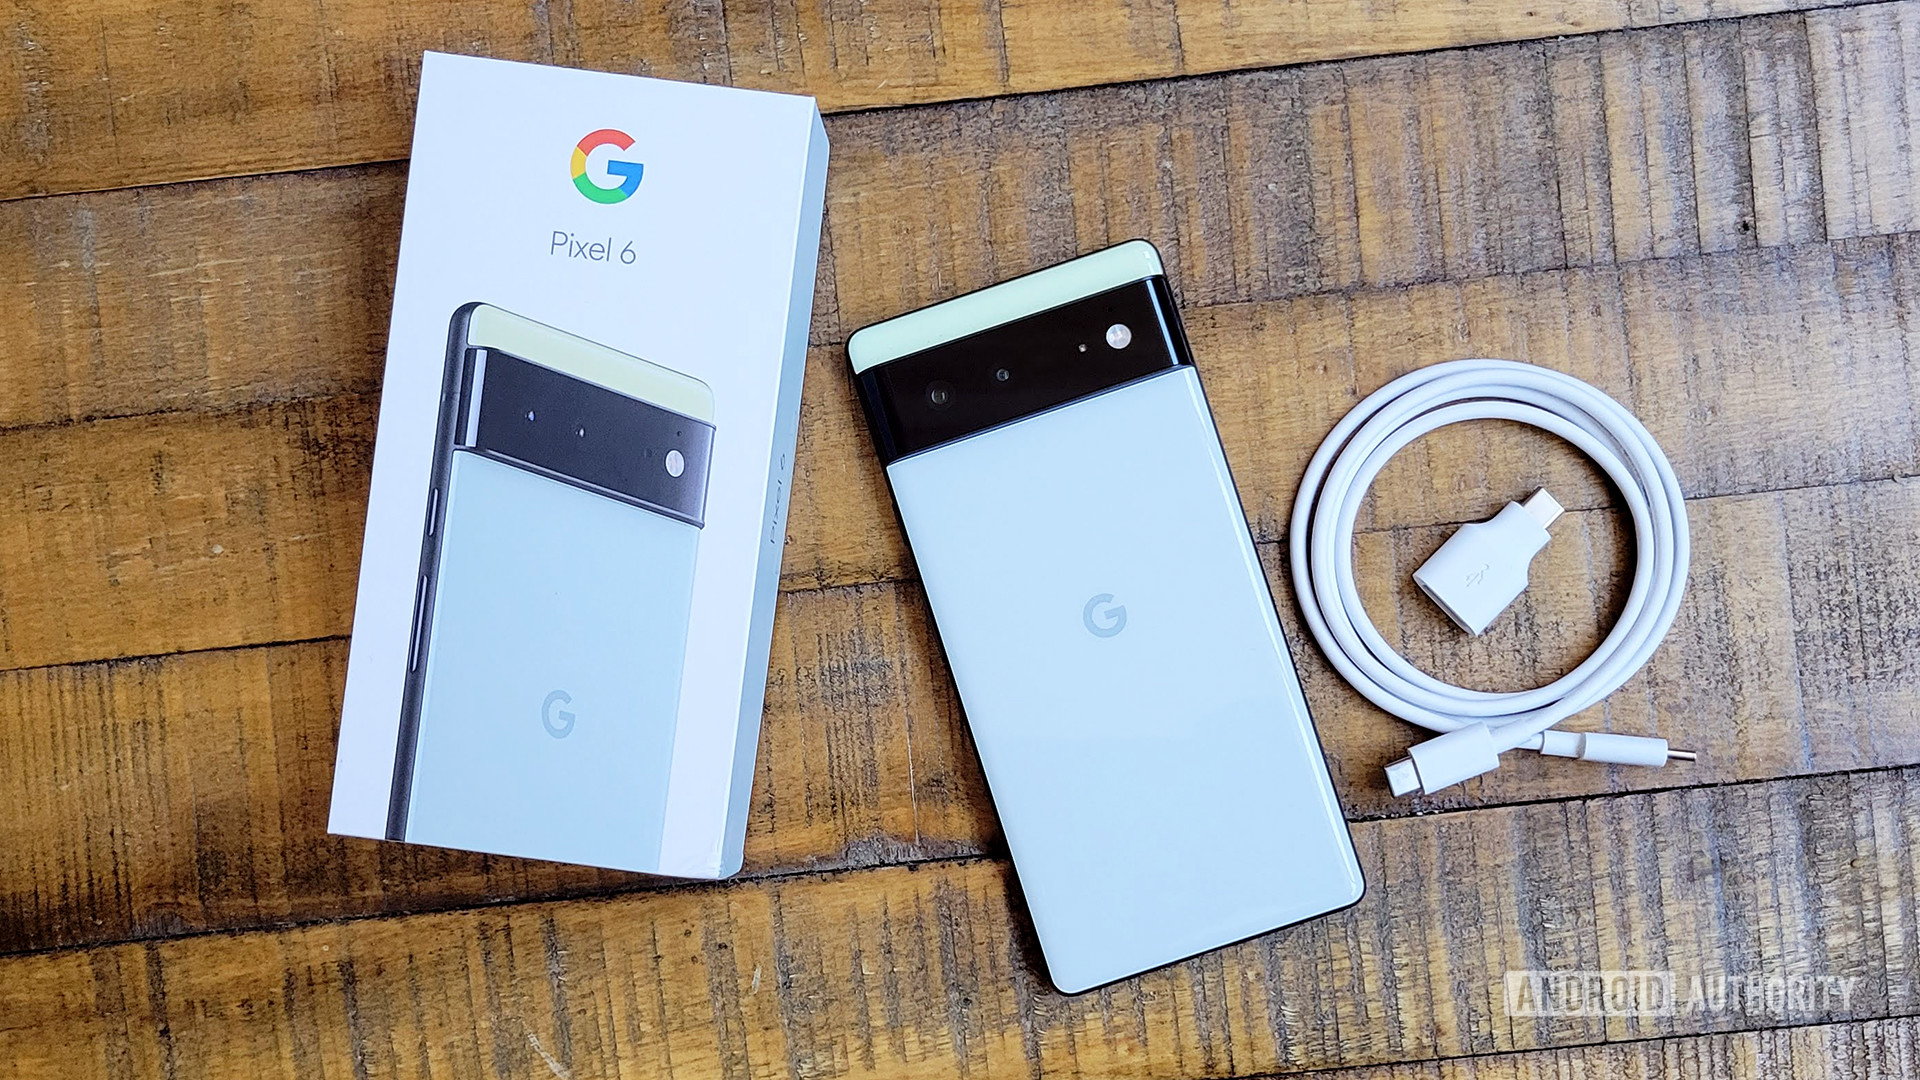 Google Pixel 6 in box retail contents - What is IMEI?